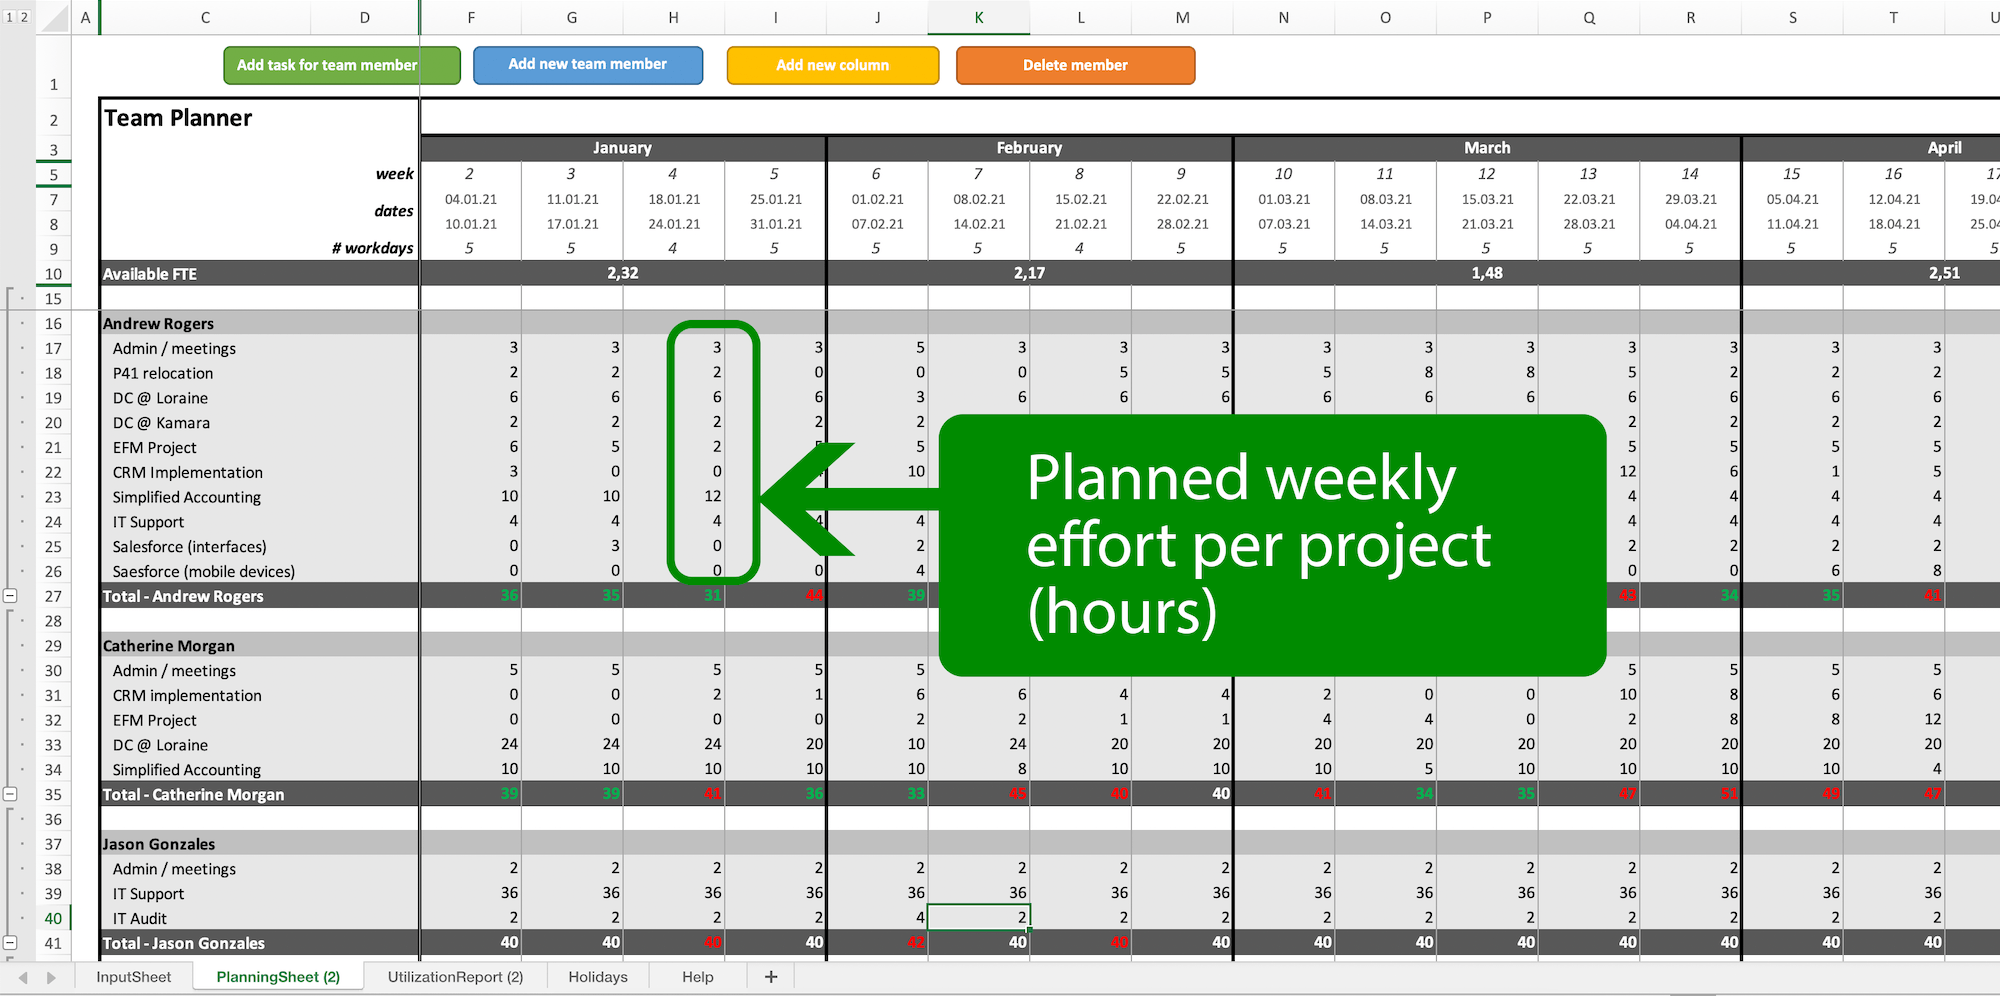 Main view of the Resource Planning Template for Excel where the weekly work effort is maintained